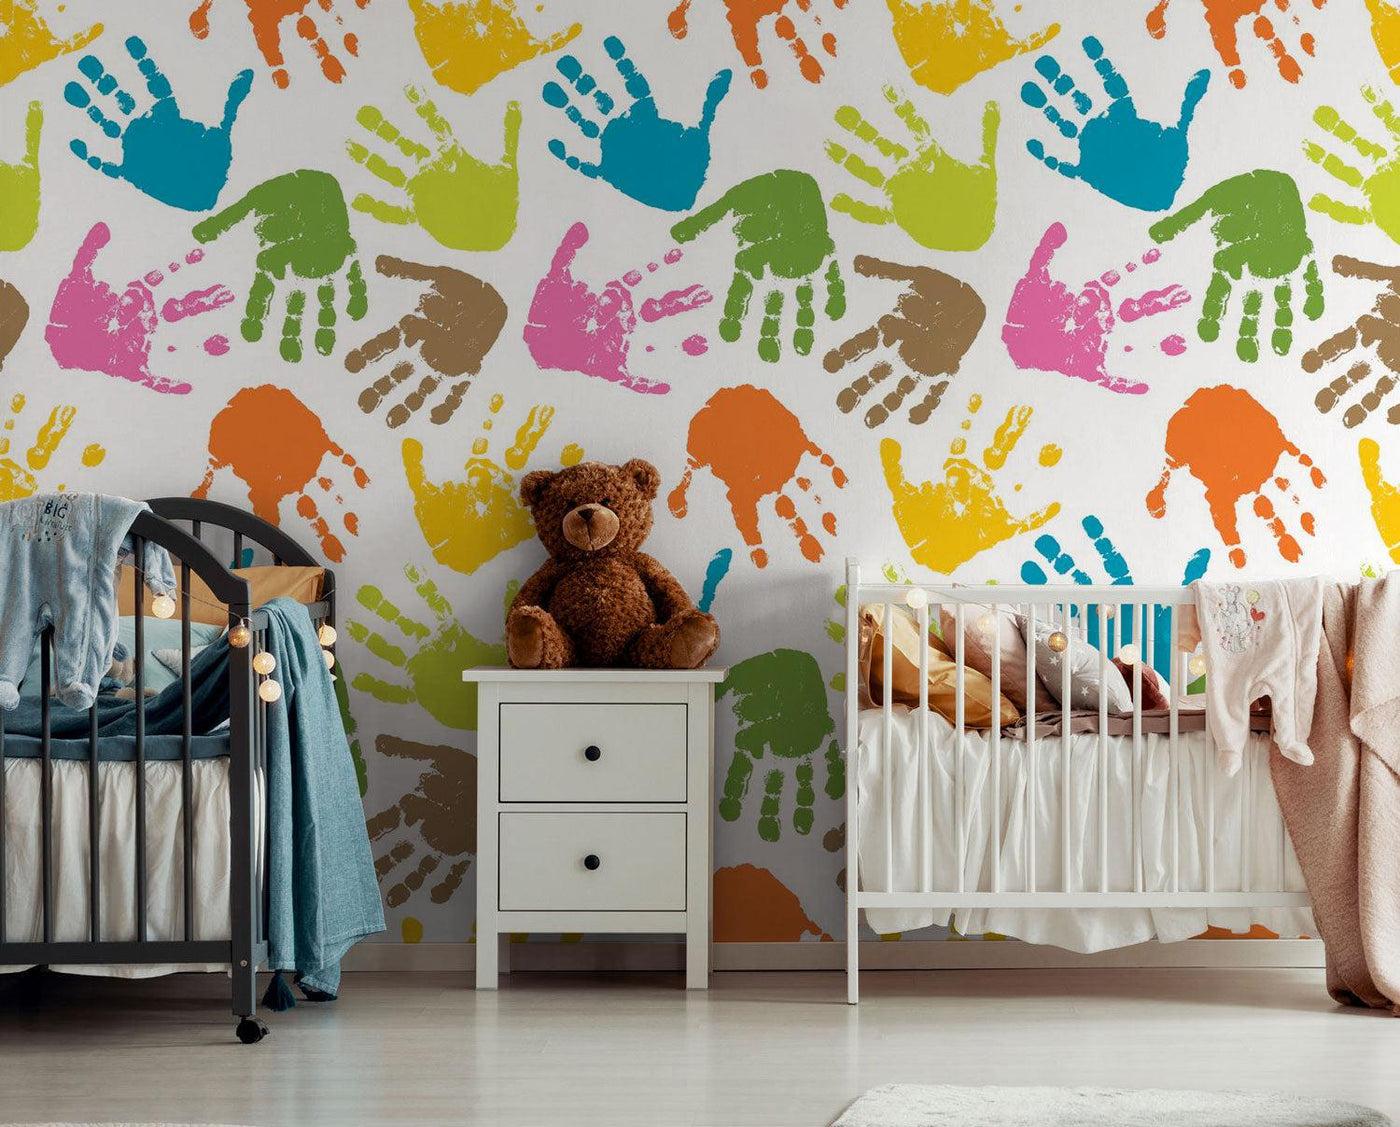 Prints of childs'hands Wall Mural-Wall Mural-Eazywallz